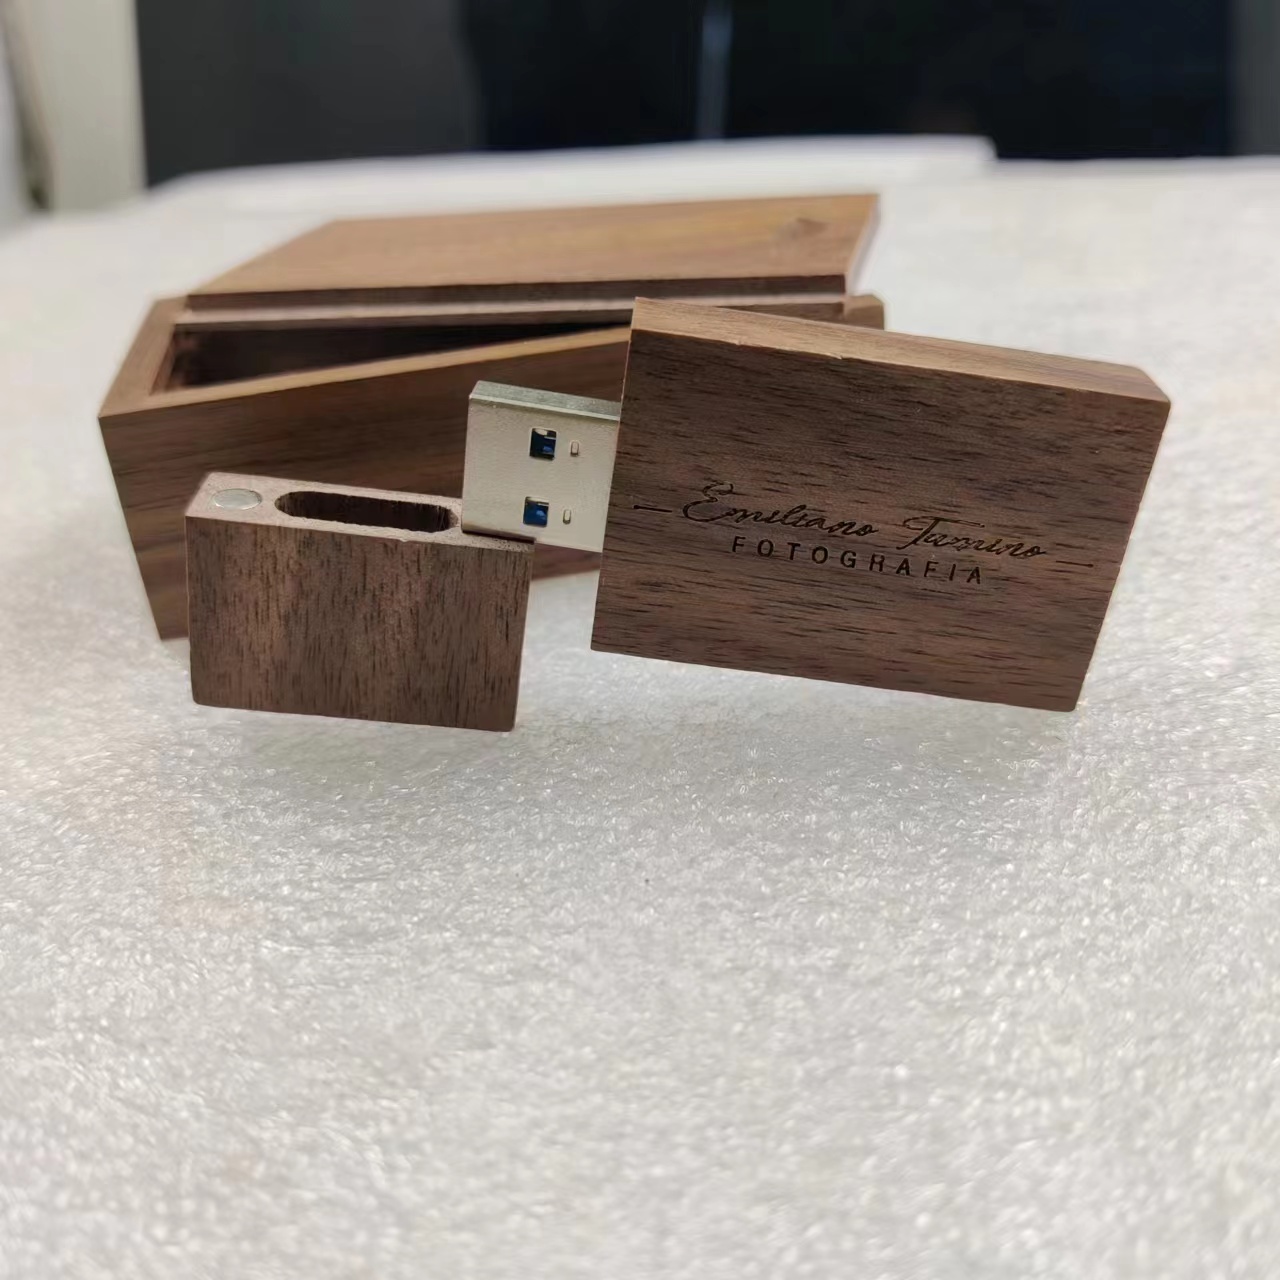 Walnut wooden Usb drives and boxes